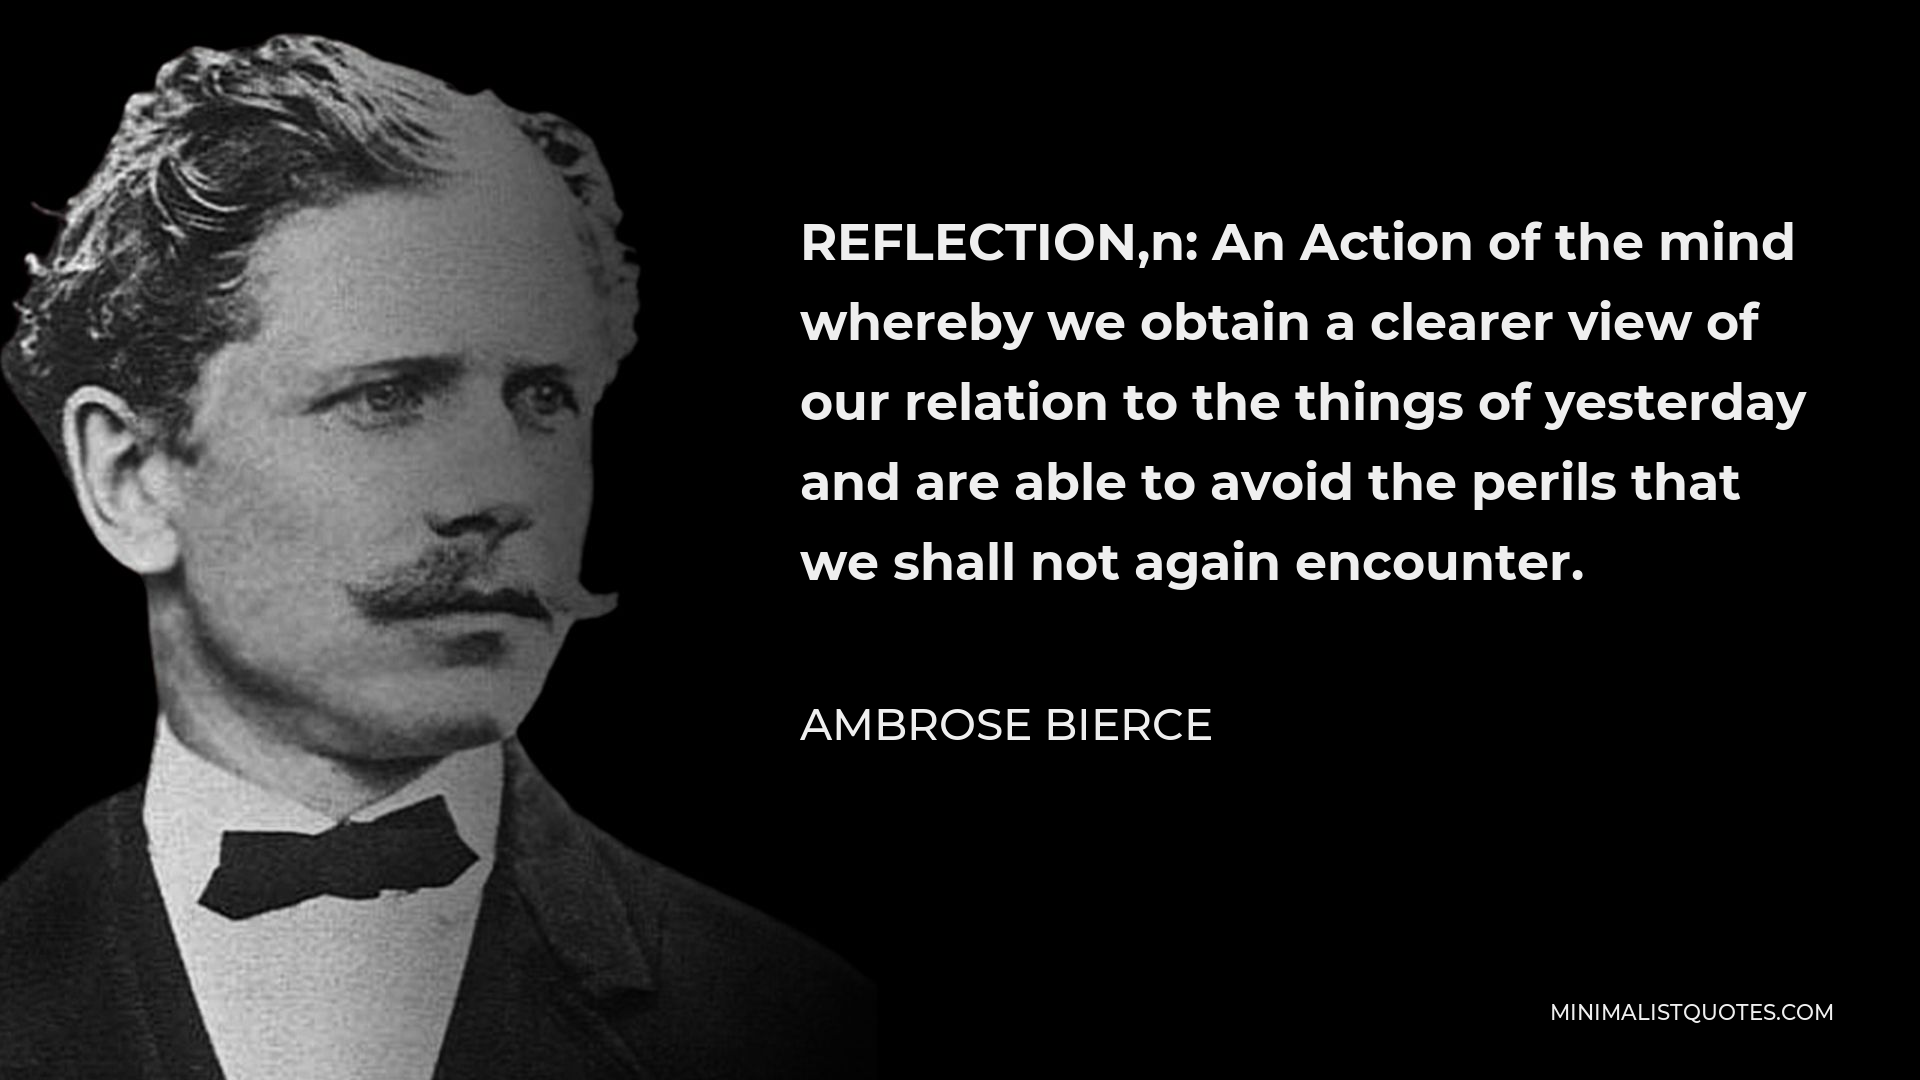 Ambrose Bierce Quote - REFLECTION,n: An Action of the mind whereby we obtain a clearer view of our relation to the things of yesterday and are able to avoid the perils that we shall not again encounter.